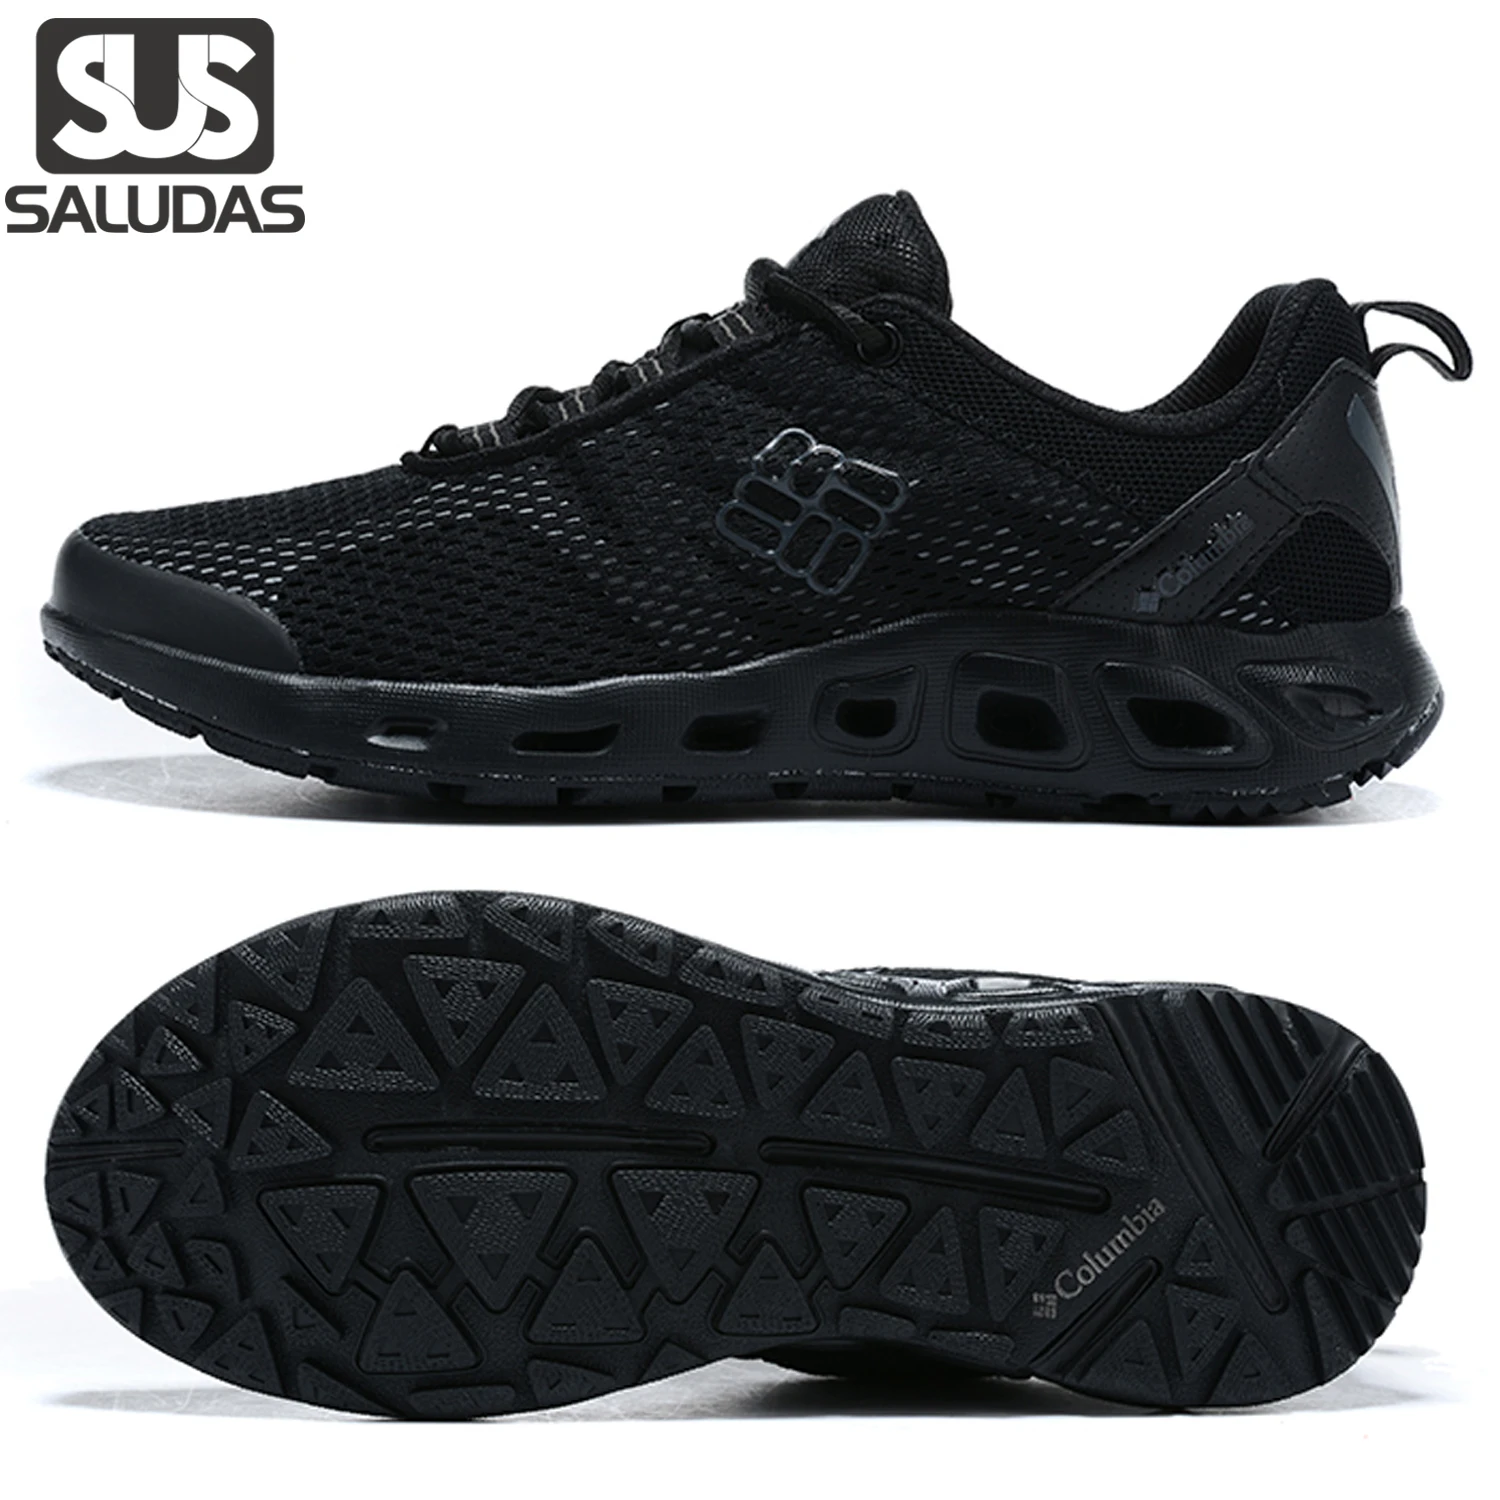 

Men Sports Shoes Drainmaker III Walking Shoes Breathable Hiking Shoes Non-Slip Trainer Comfortable Trekking Trail Running Shoes